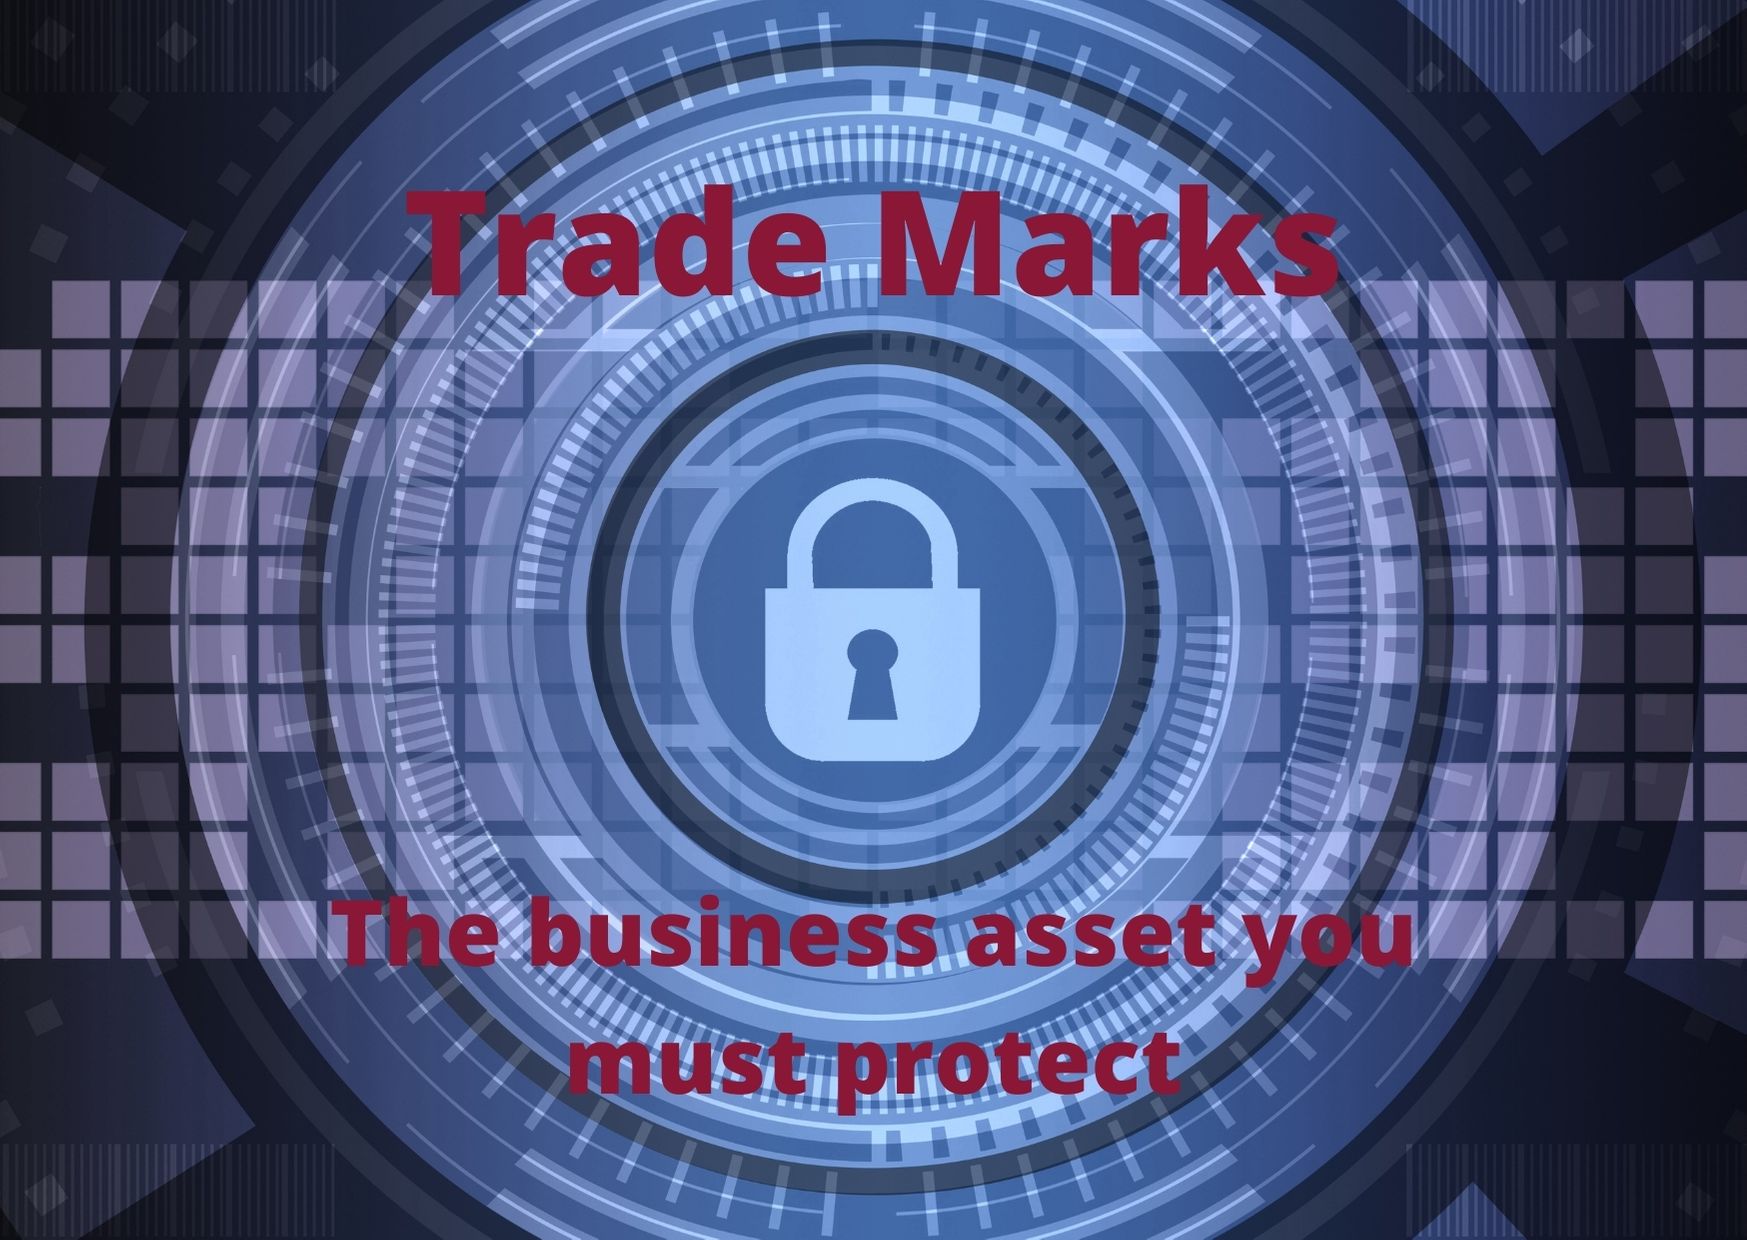 Lock and protection image for Trade Marks